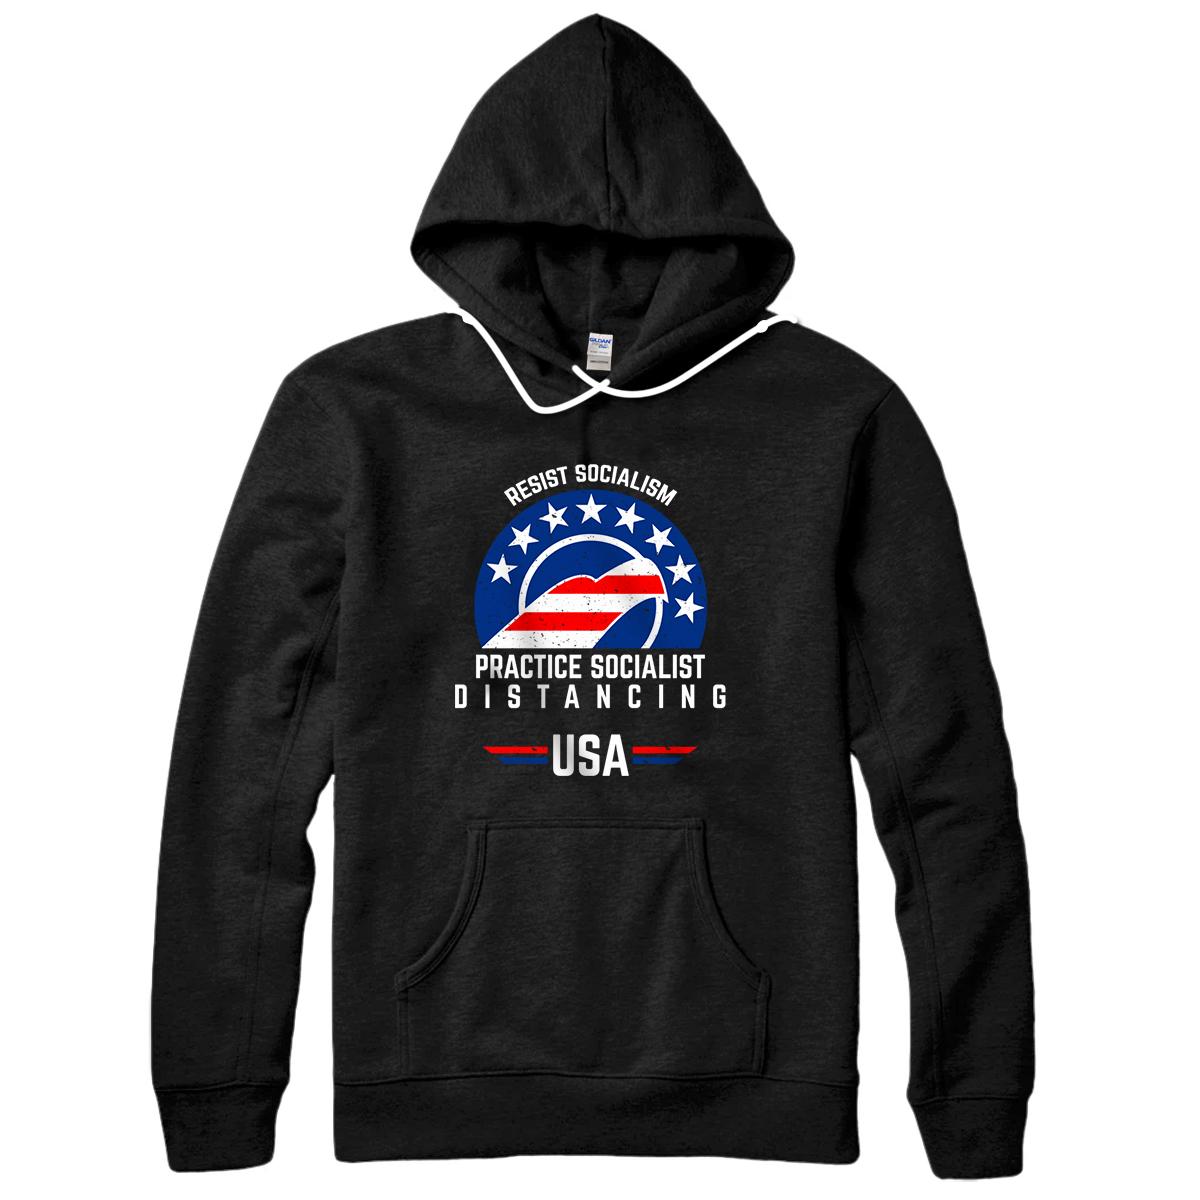 Personalized Practice Socialist Distancing - USA Resist Socialism Gift Pullover Hoodie